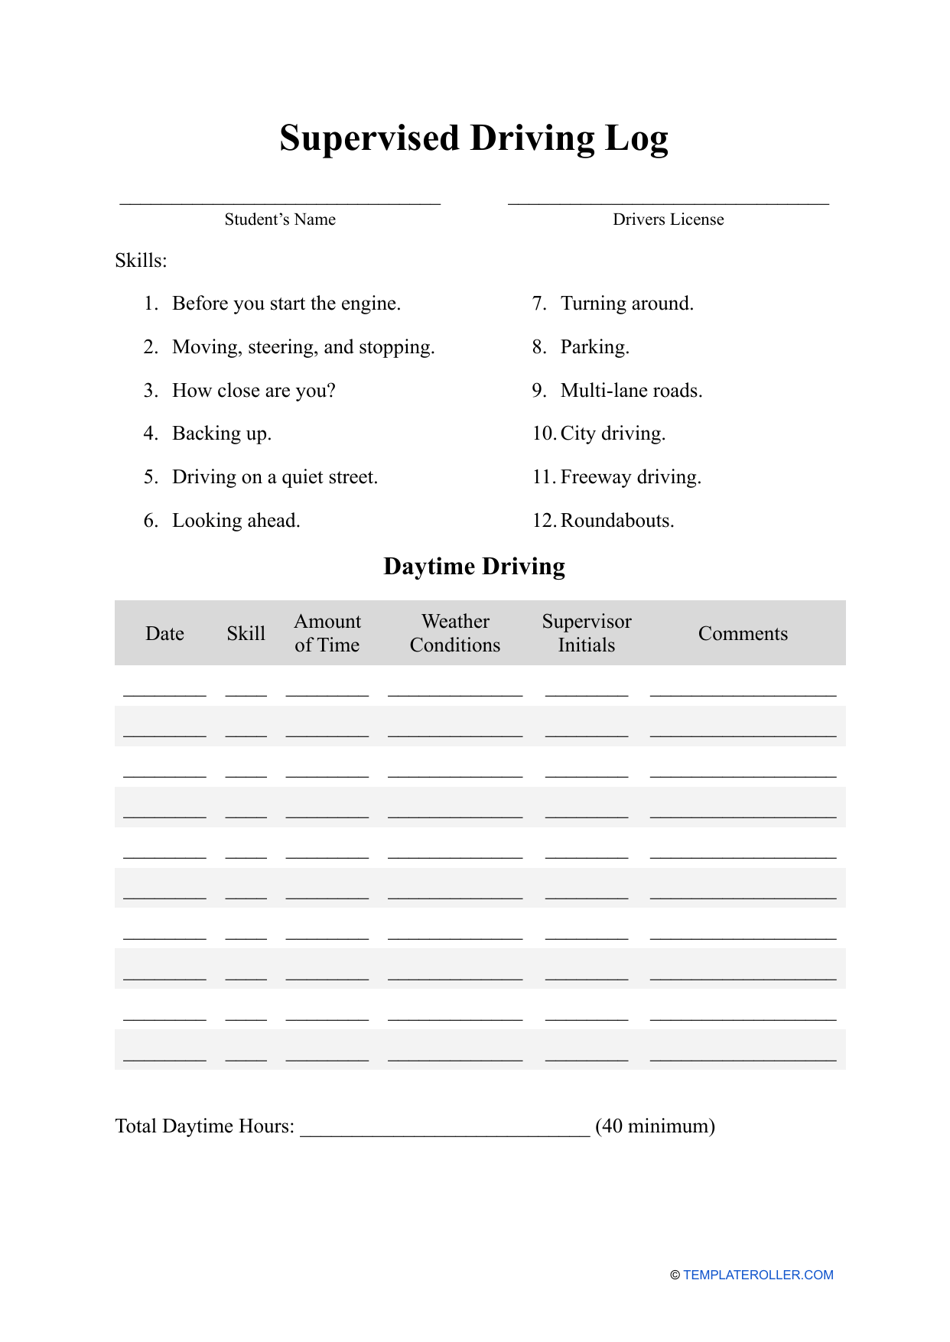 Supervised Driving Log Template - Easily keep track of supervised driving hours